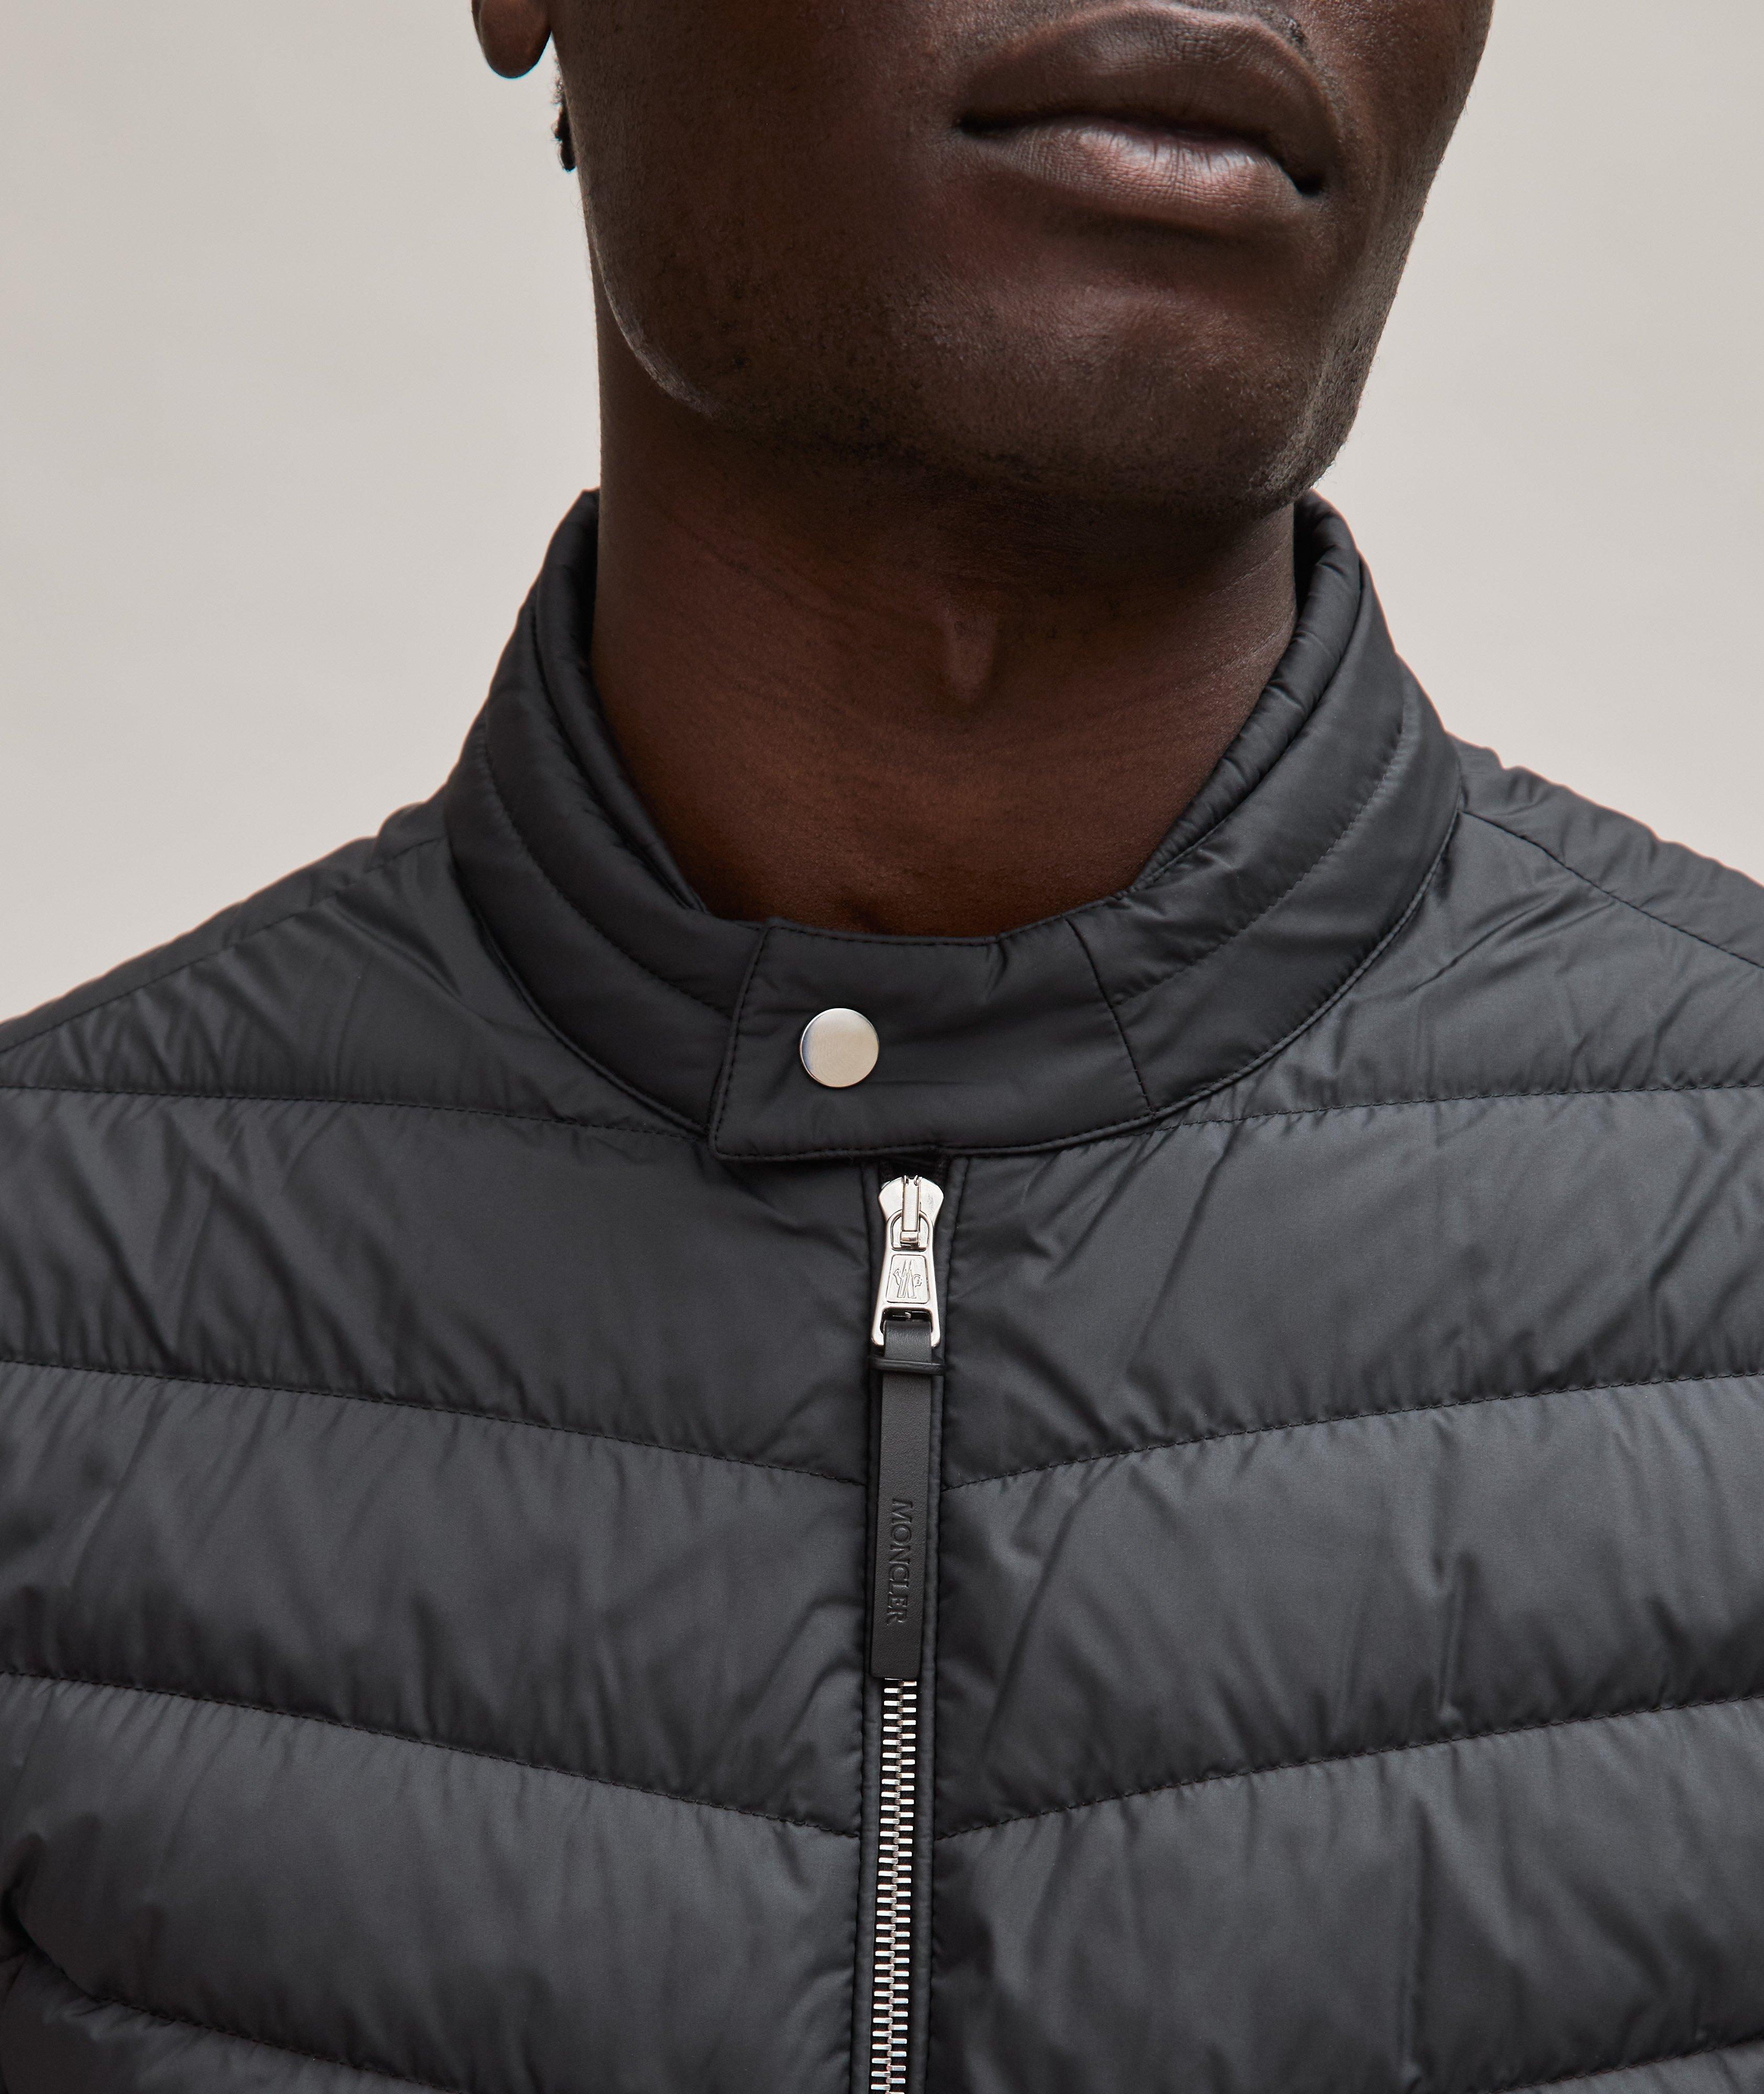 Maurienne Quilted Jacket image 3